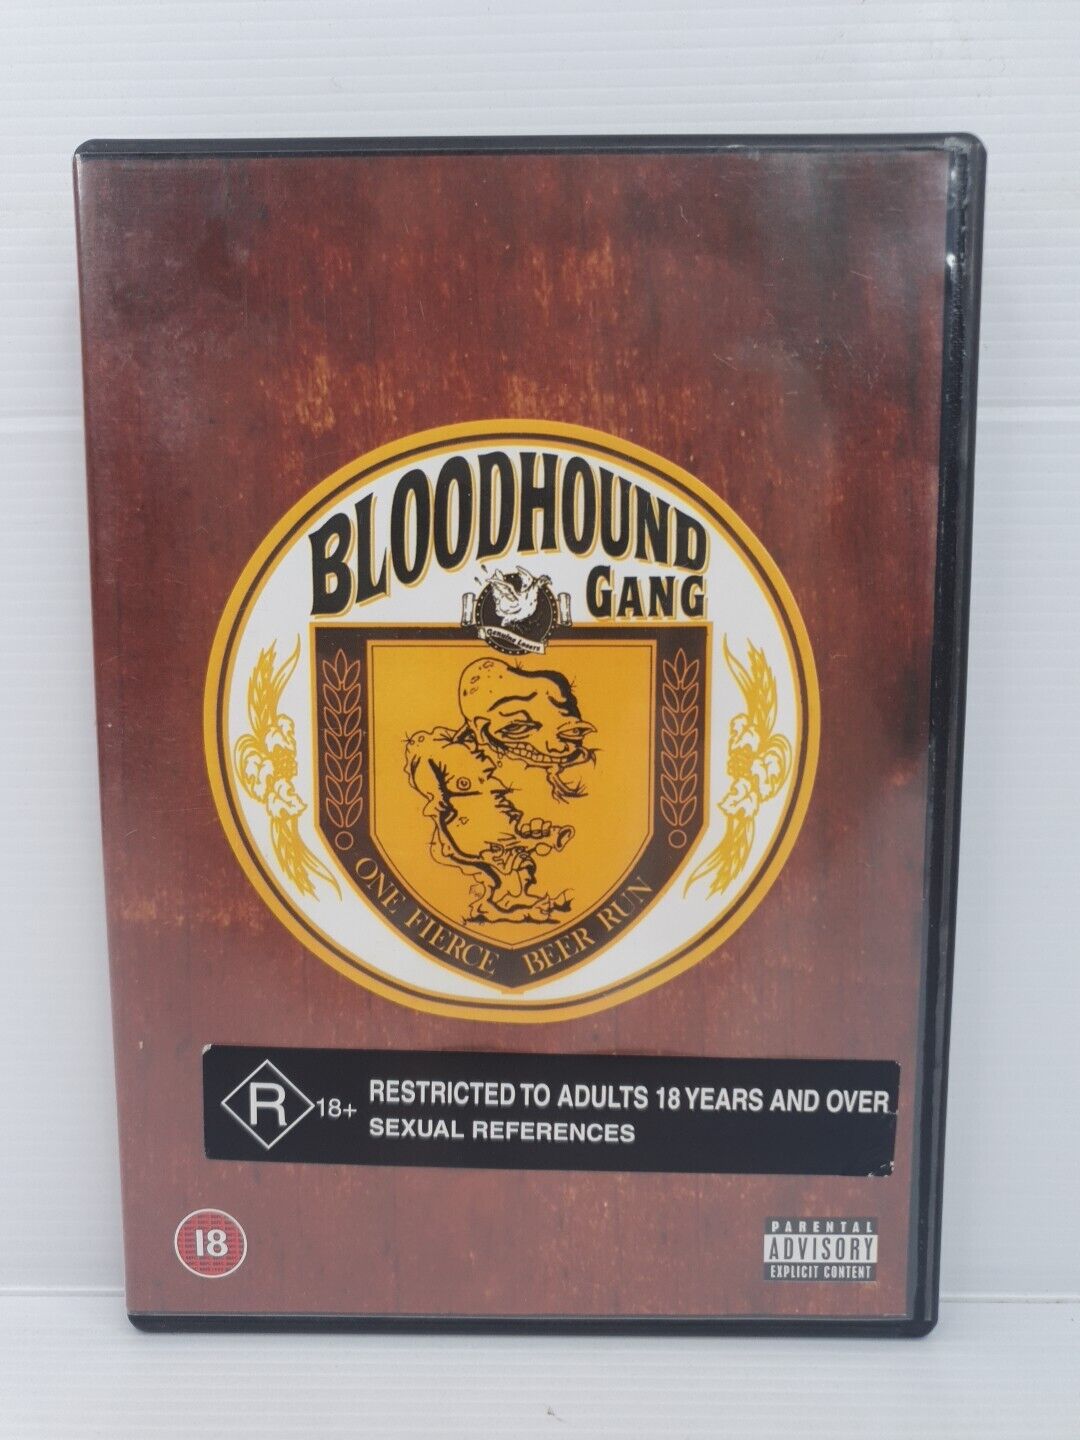 One Fierce Beer Run by The Bloodhound Gang (DVD, 2003) VGC + FreePostage ALL PAL